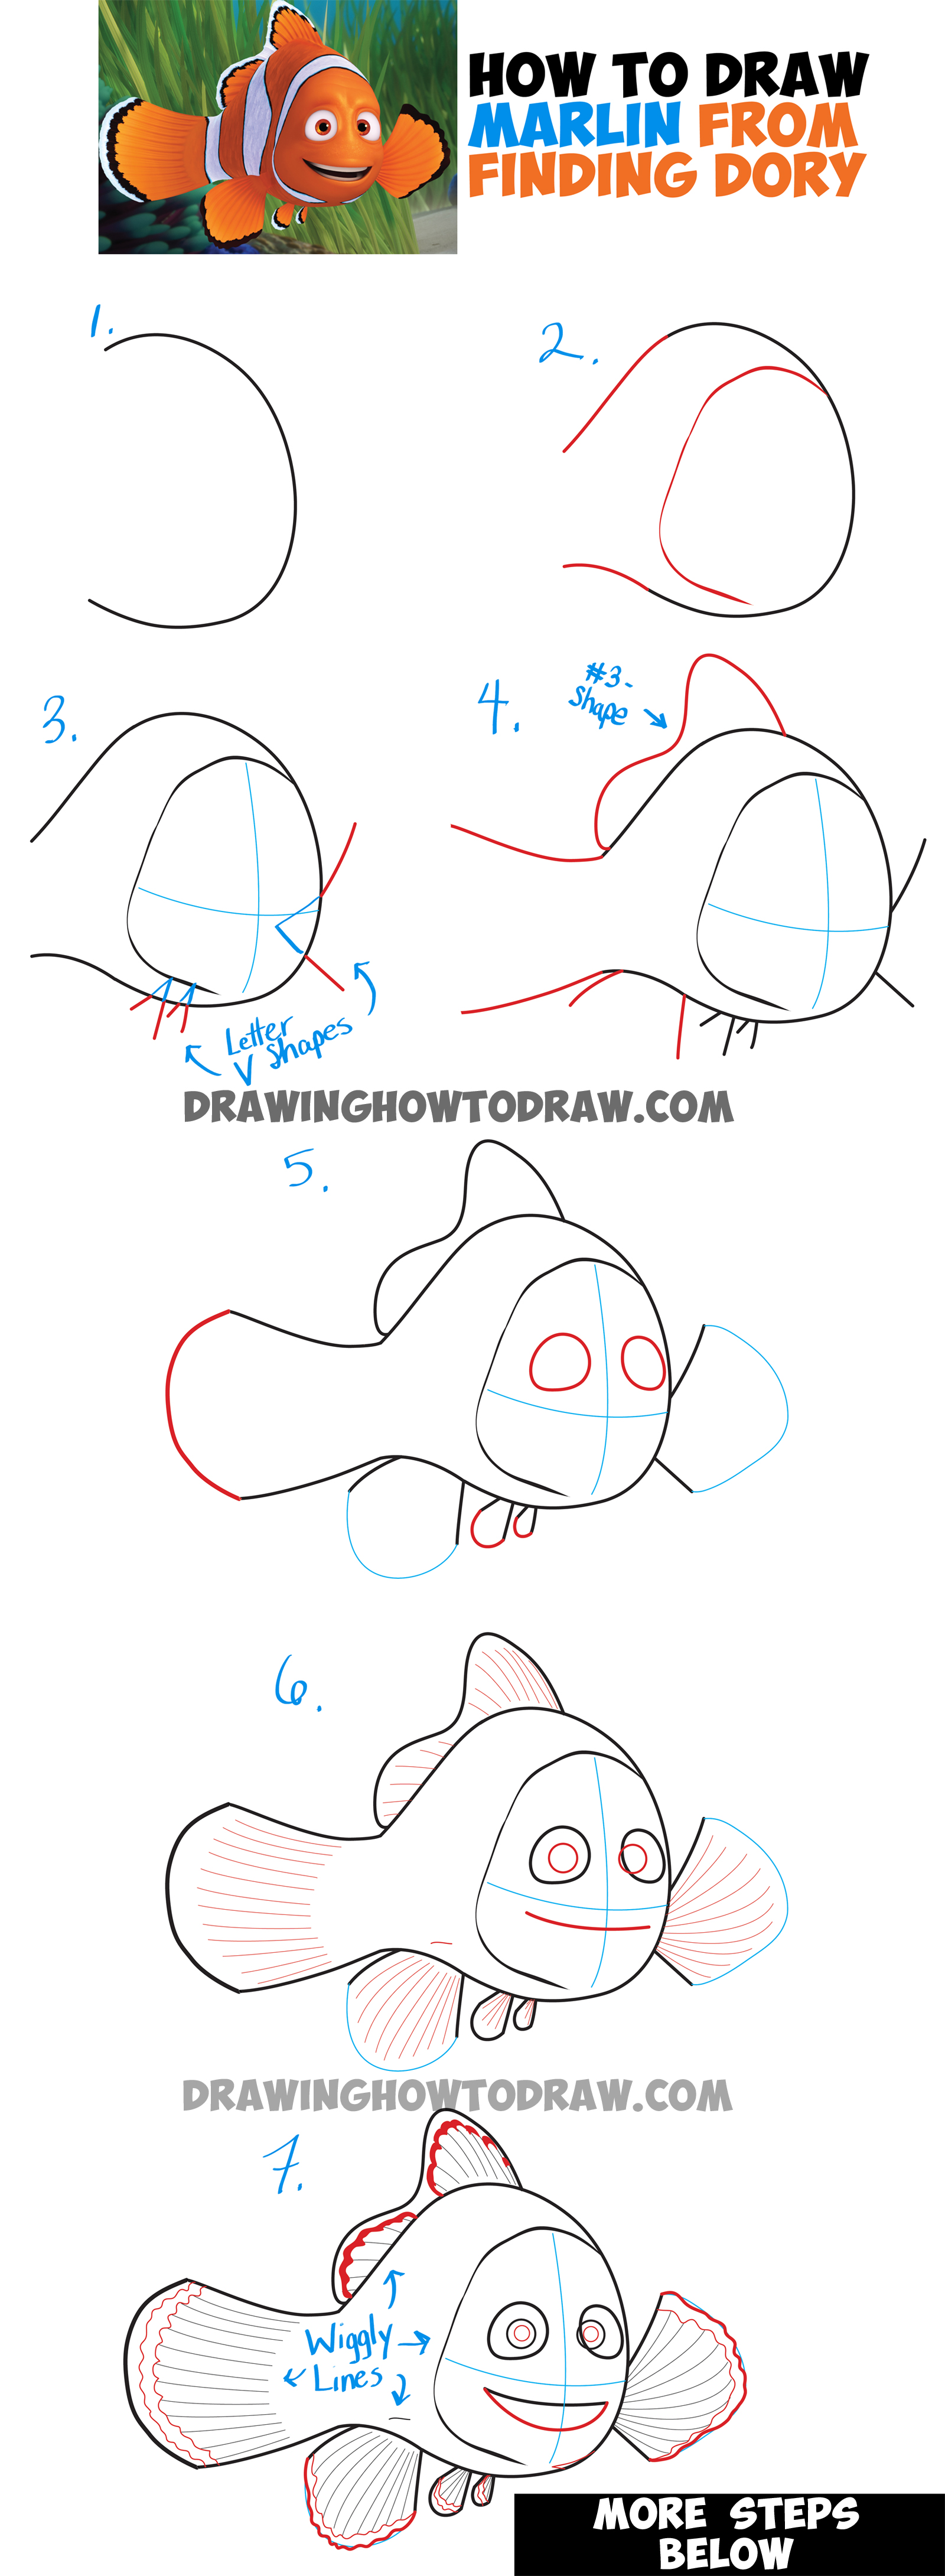 Learn How to Draw Marlin from Finding Dory and Finding Nemo - Simple Steps Drawing Lesson